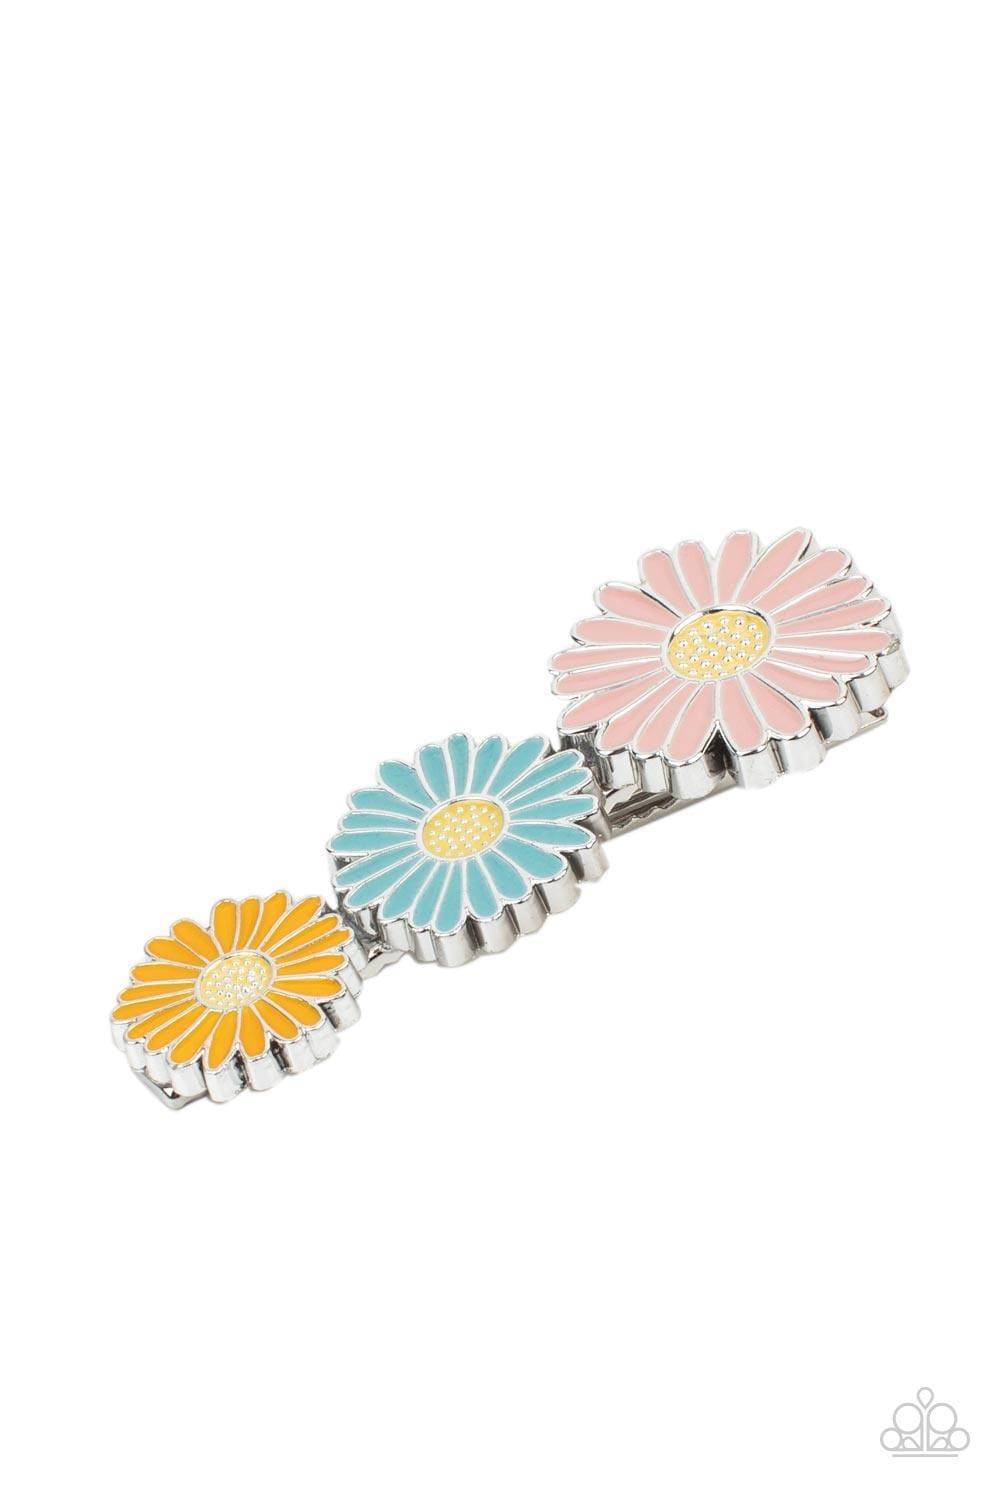 Paparazzi Accessories - Posy Perfection - Multicolor Hair Clip - Bling by JessieK